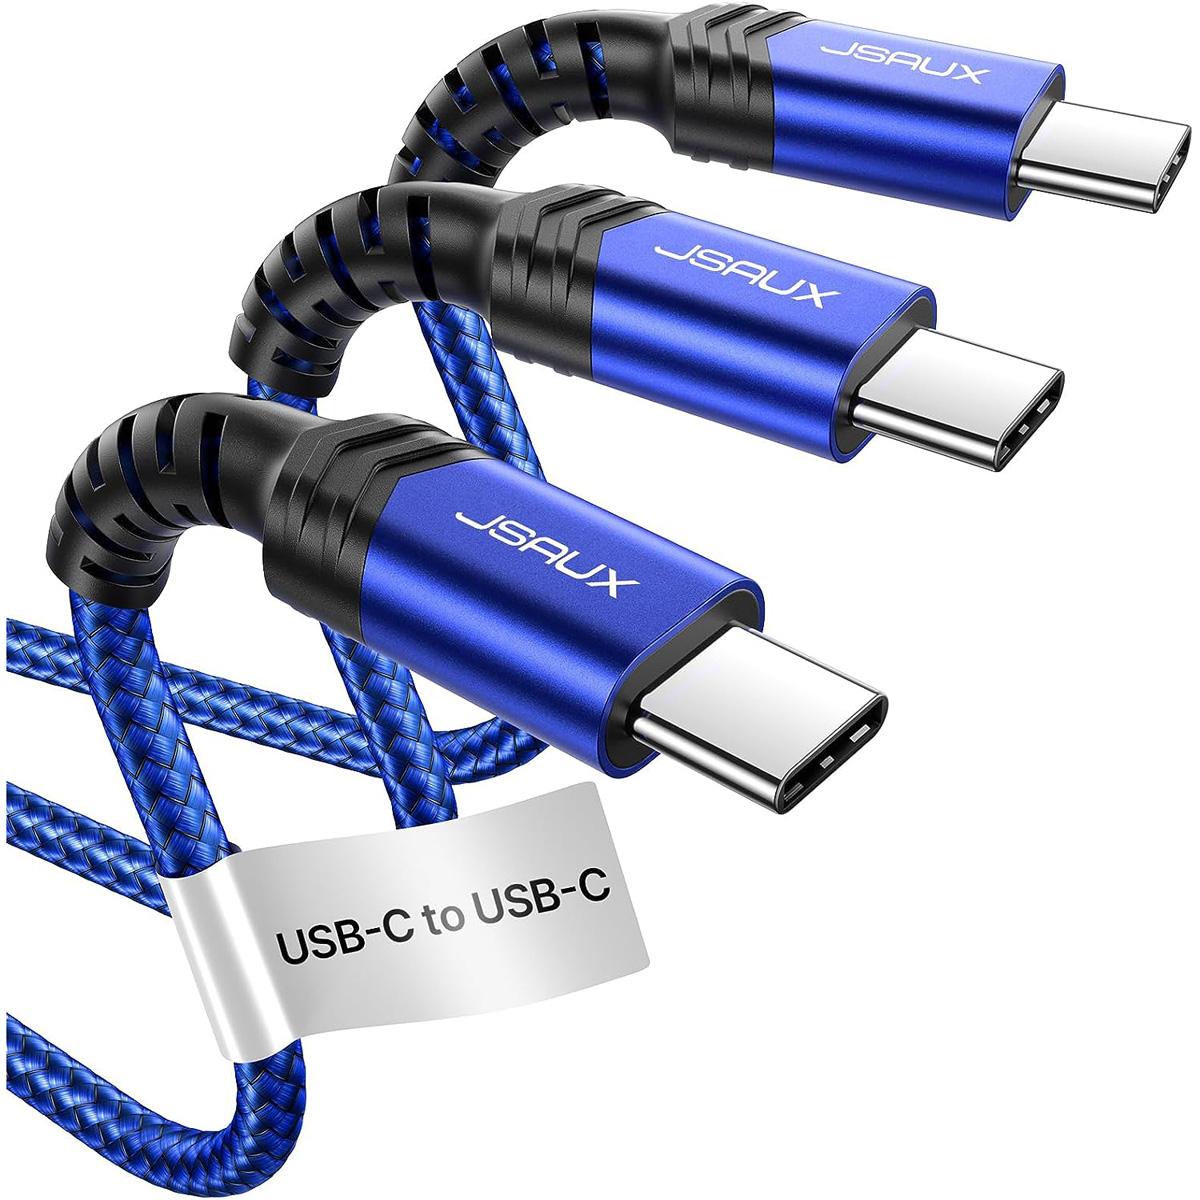 USB C to USB C Charging Data Transfer Cables 3 Pack for $7.94